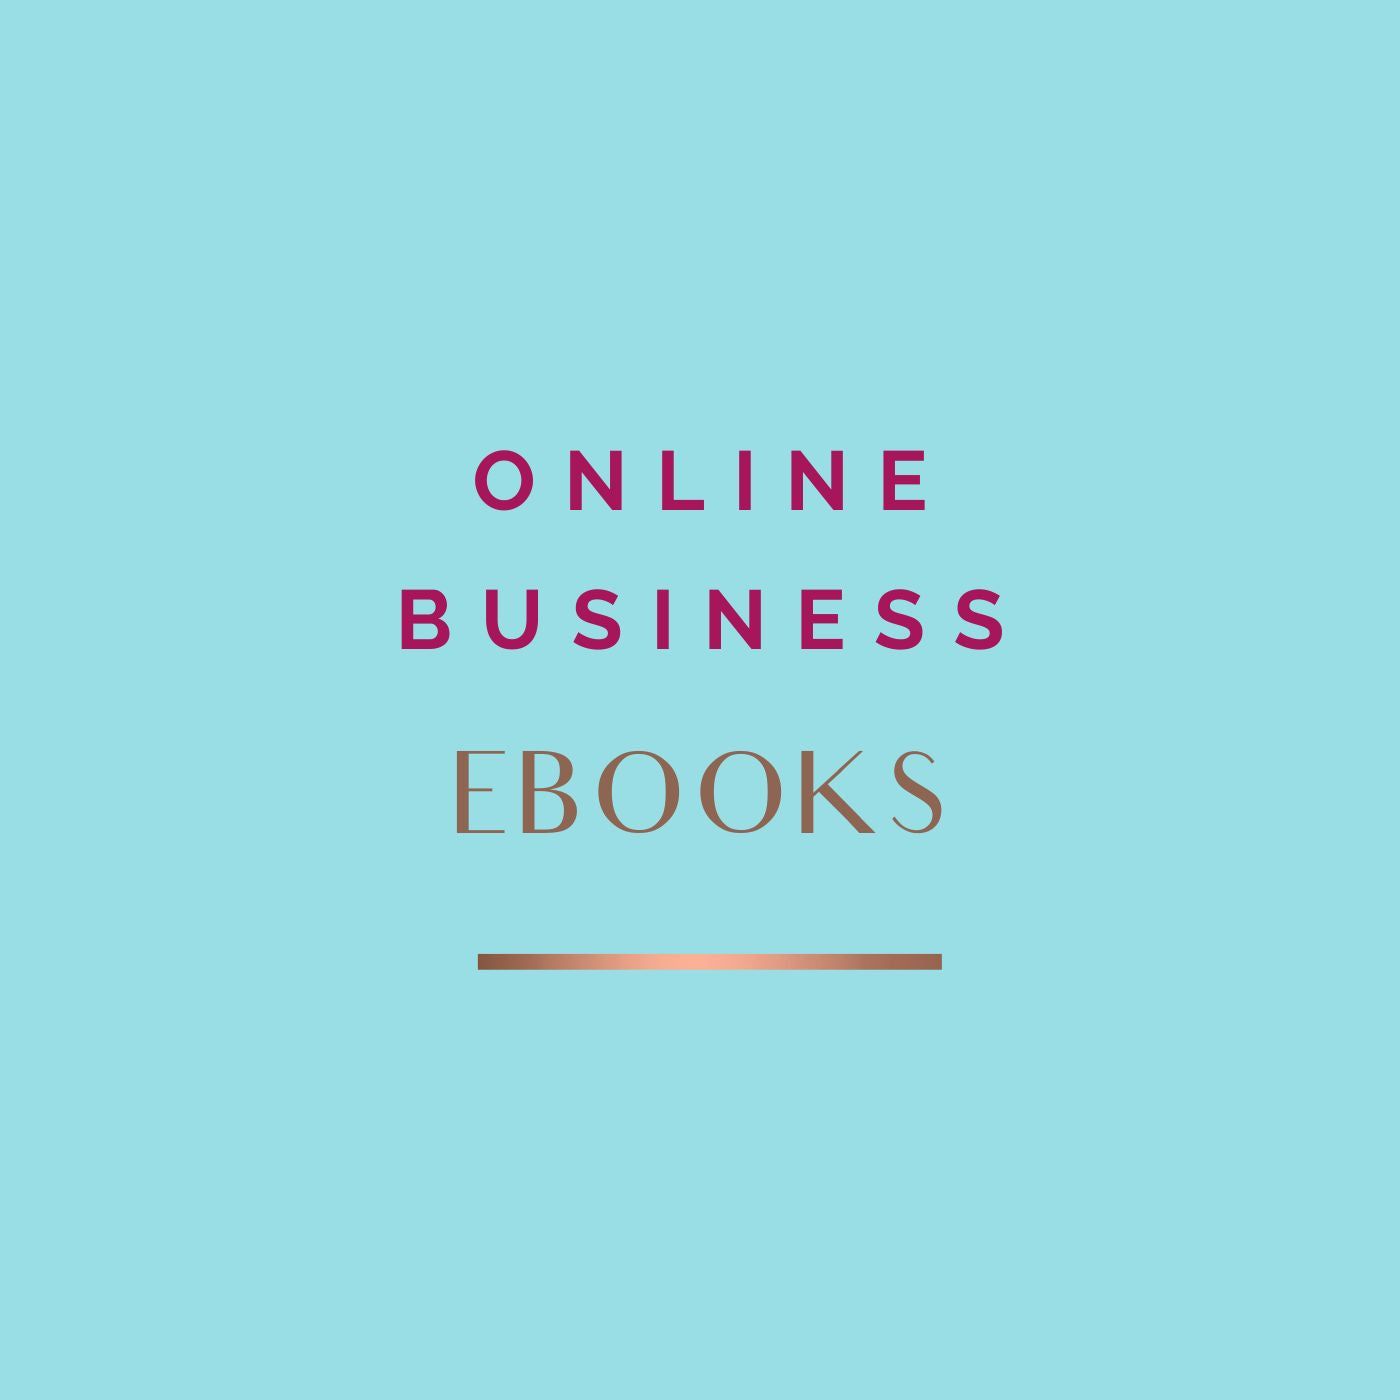 Online Business eBooks and Resources